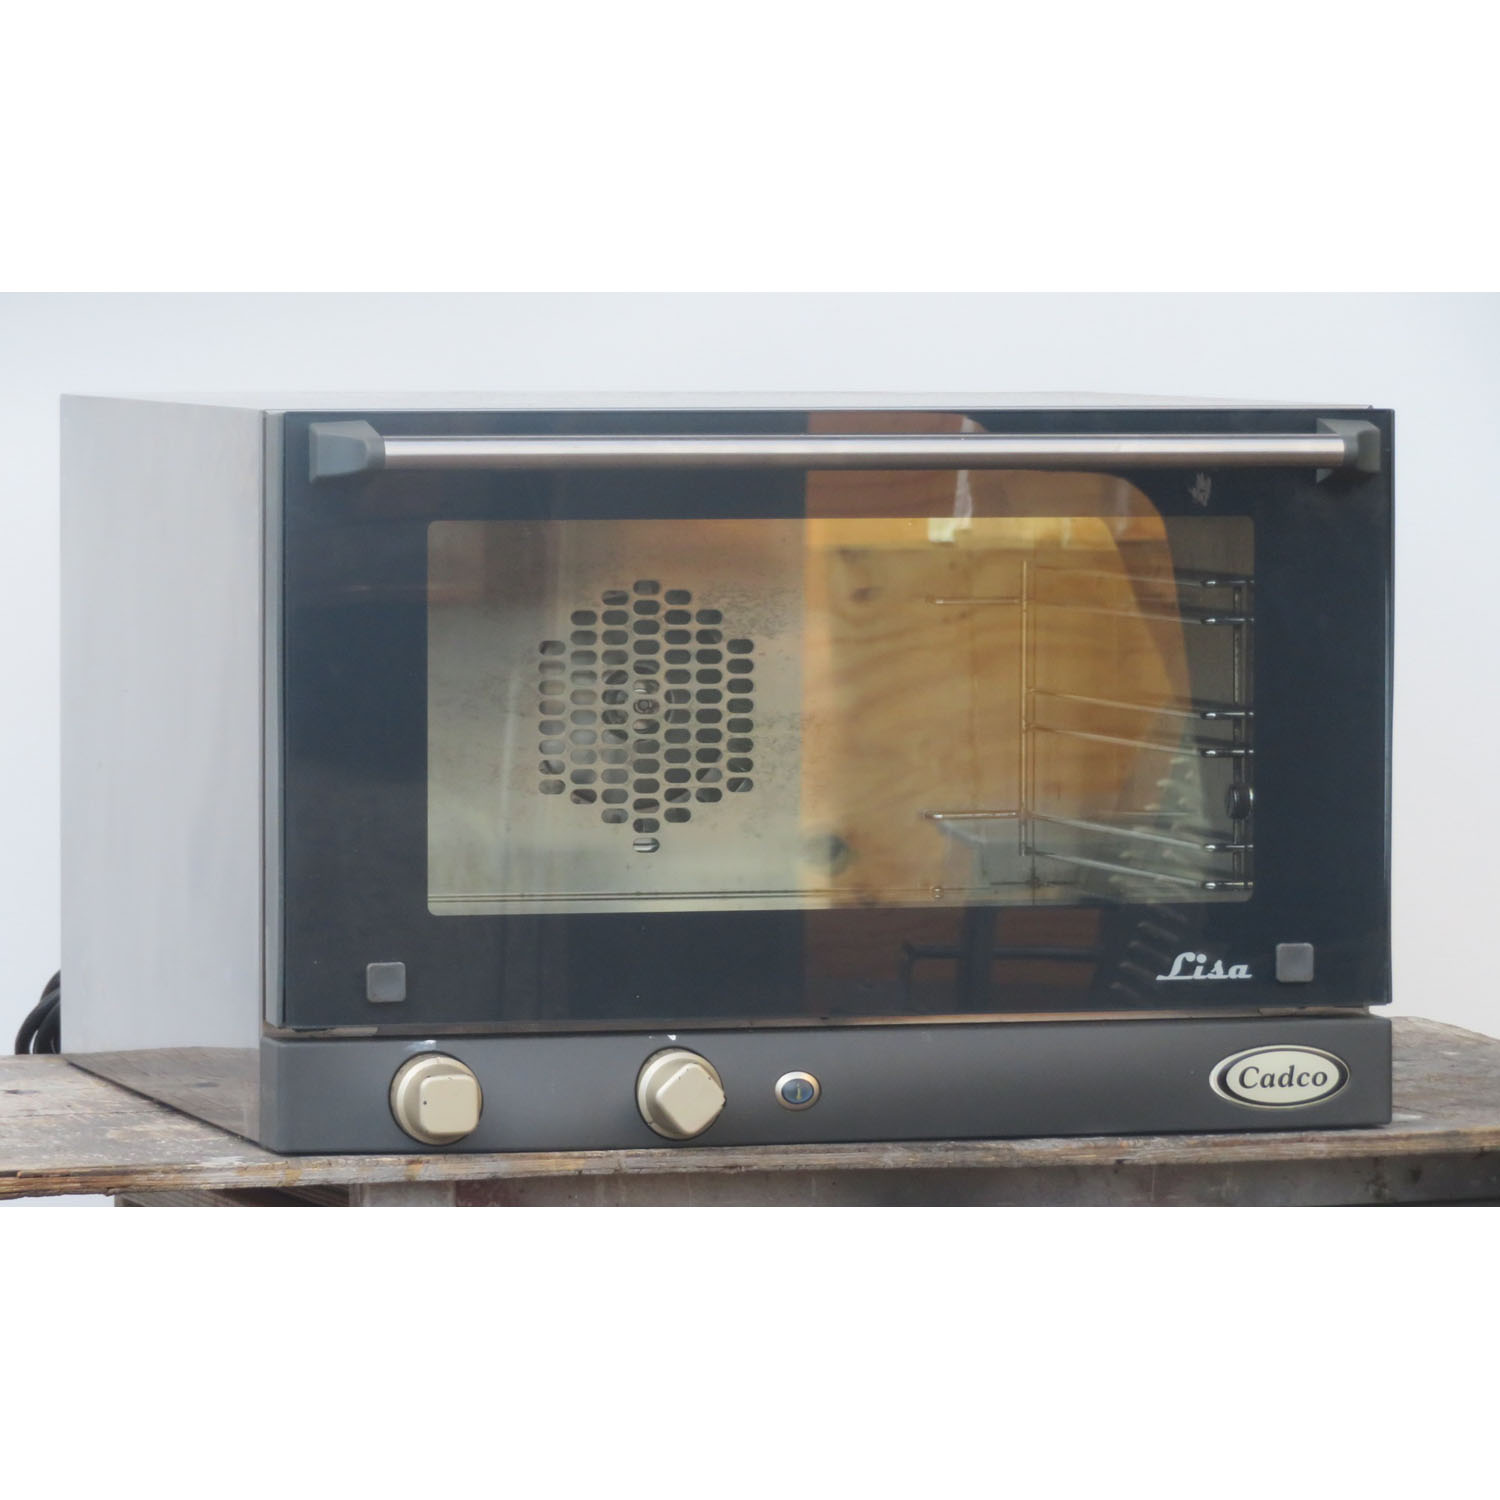 Cadco XAF013 Convection Oven, Used Excellent Condition